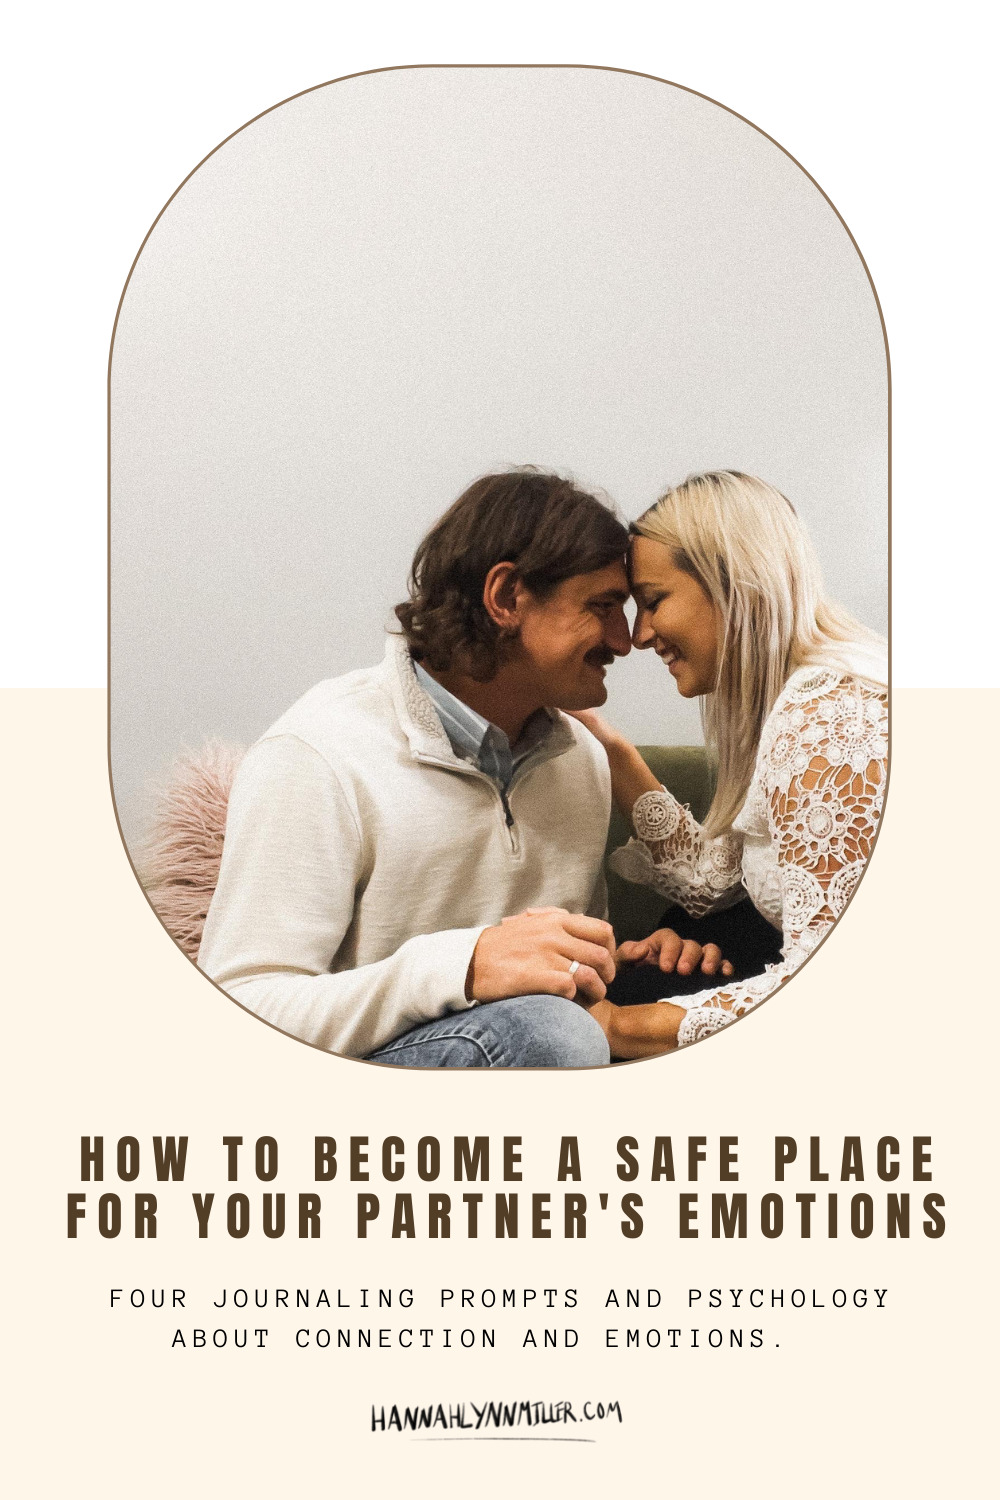 How to Be A Safe Place for Your Partner’s Emotions